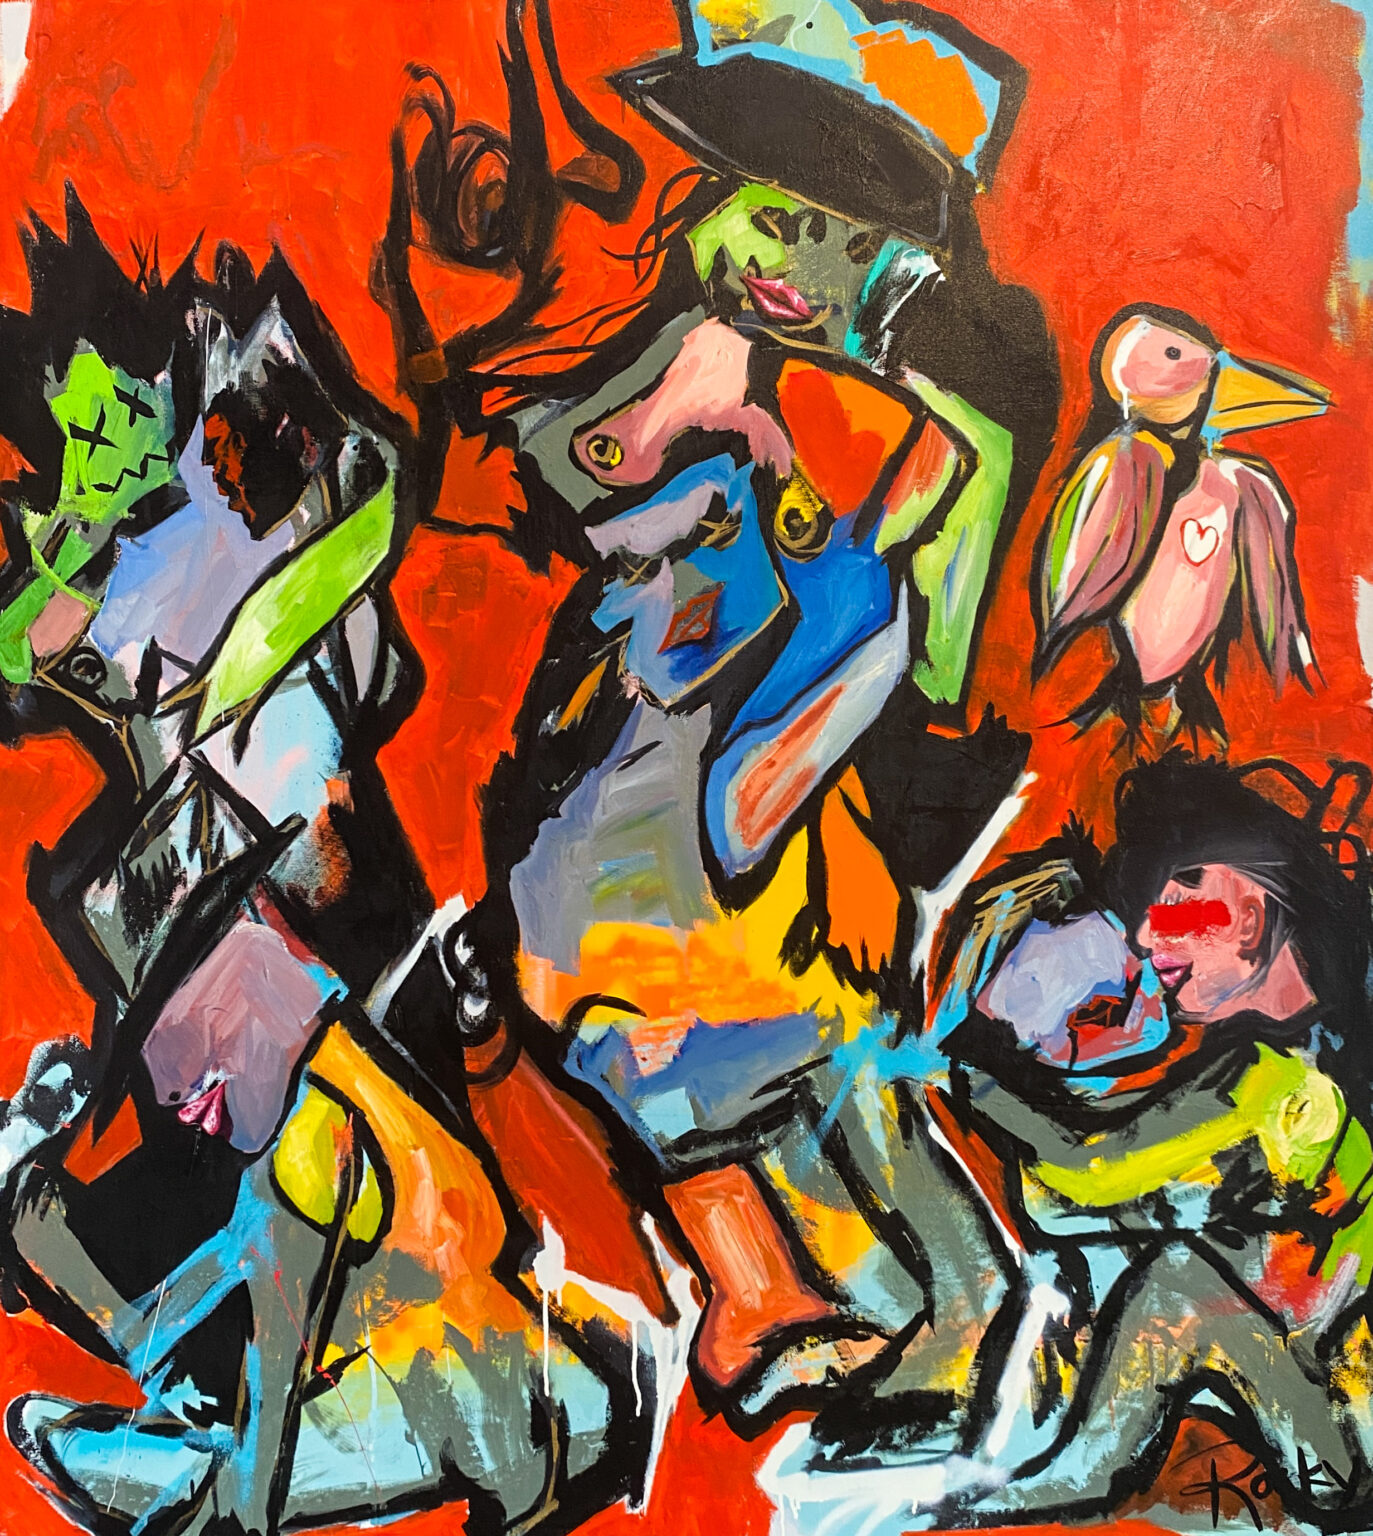 "IT’S A PARTY" acrylic on canvas painting by Rocky Asbury